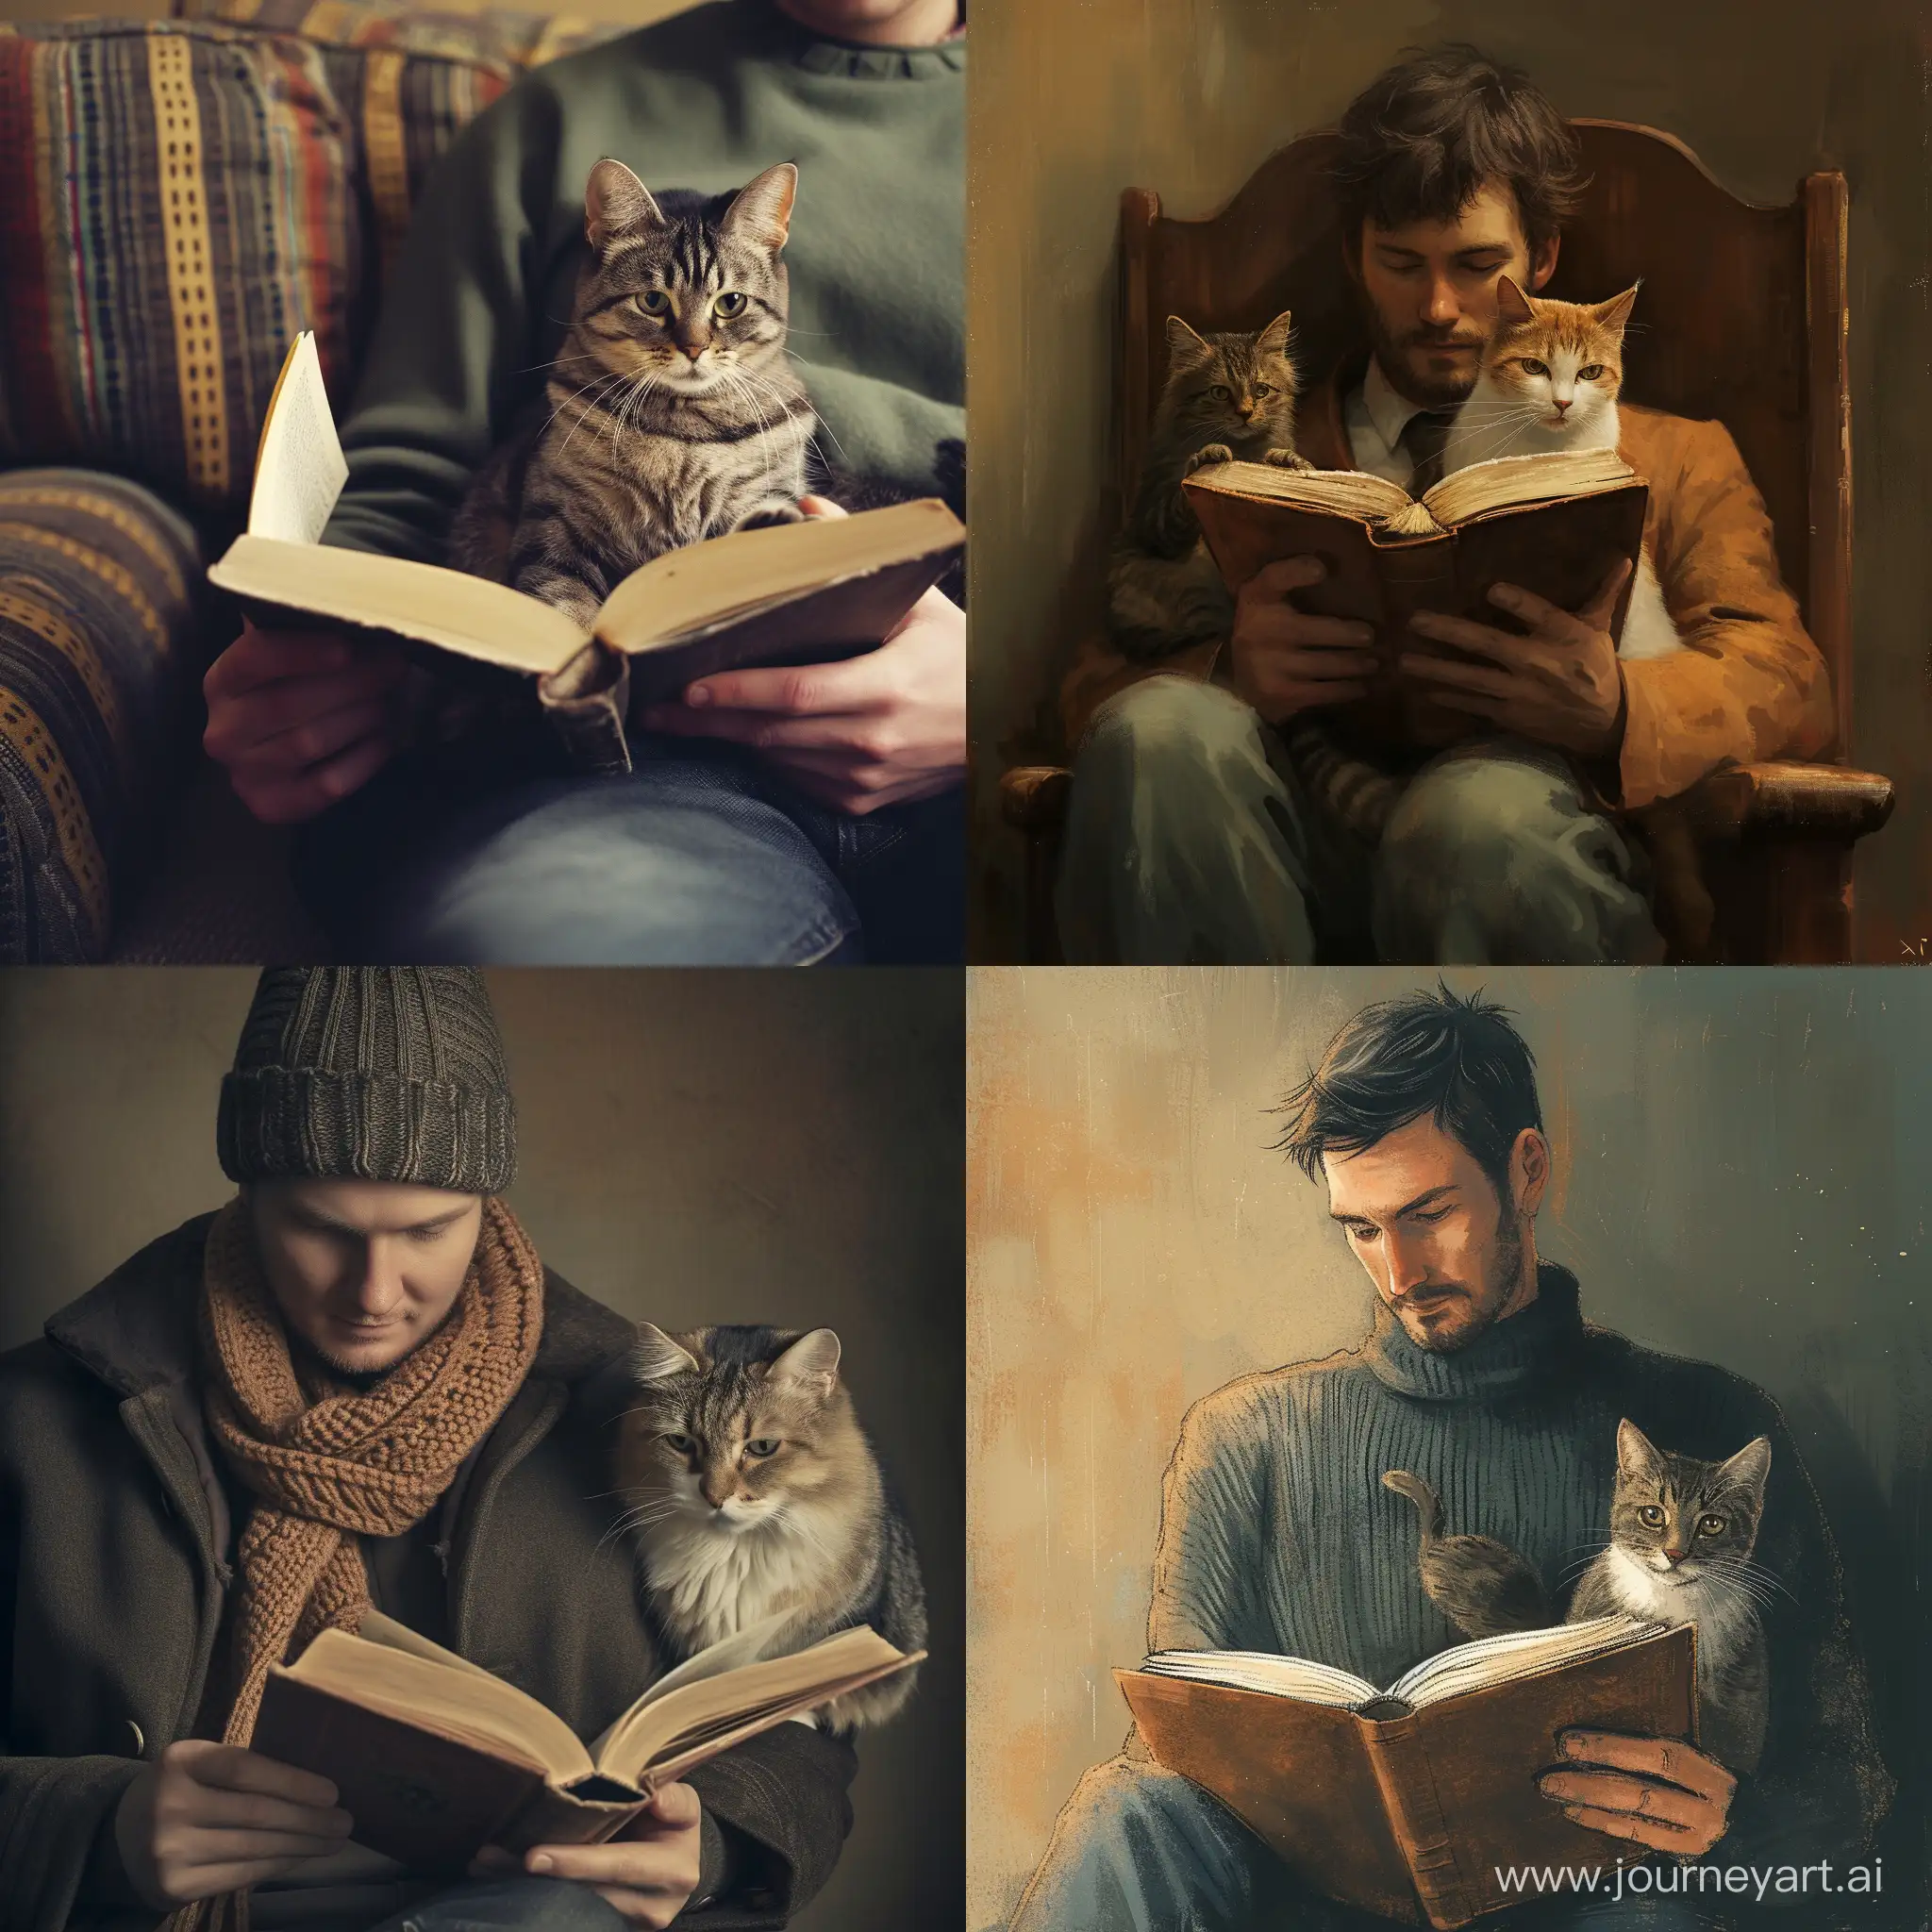 A man Reading a book while a cat is on his lap